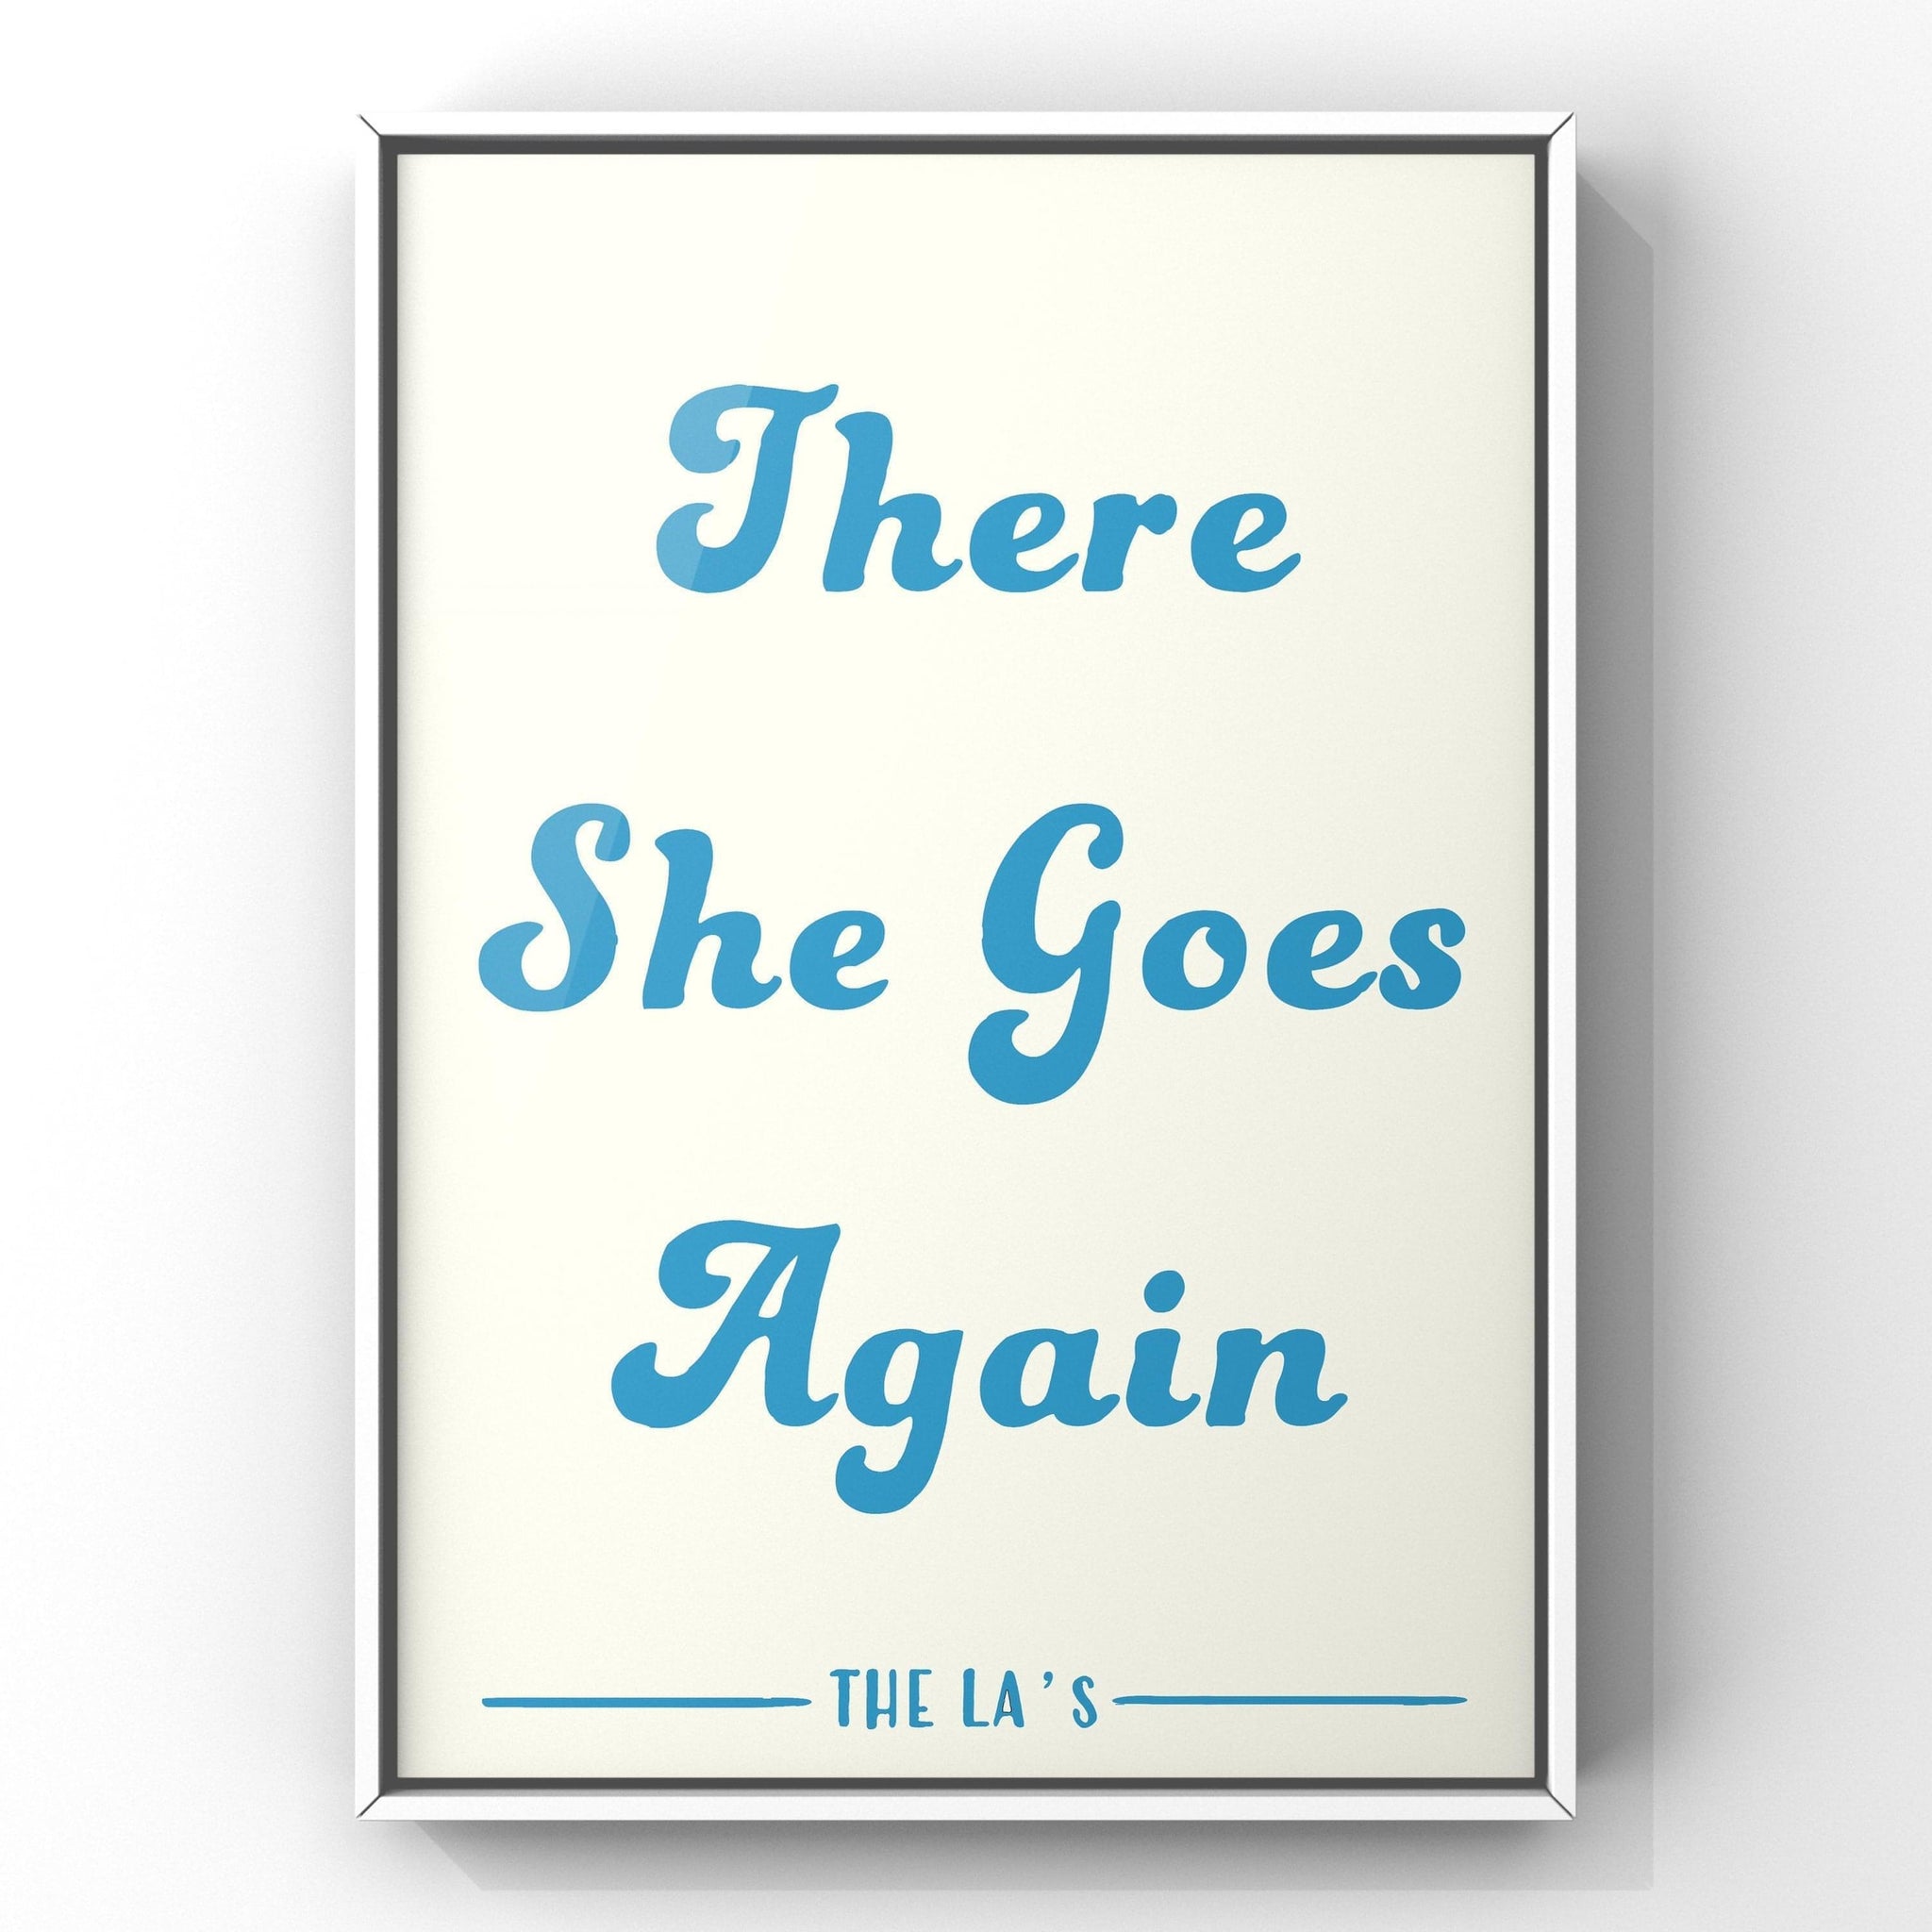 There She Goes Again by The La's – Wes Doodle